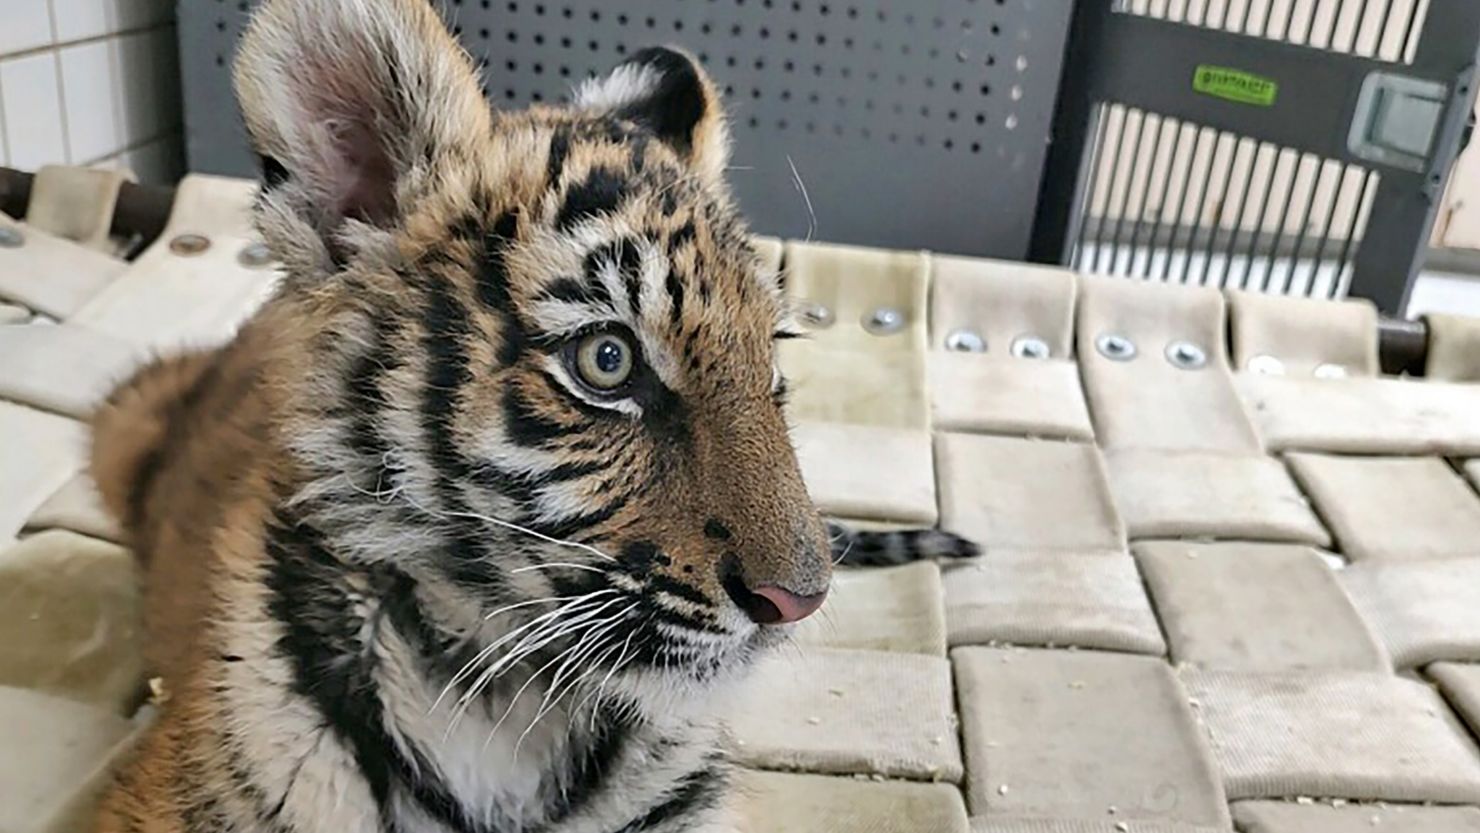 A Bengal tiger cub named "Duke" was recovered by police during shooting investigation in New Mexico and found a new home at a Colorado animal sanctuary. 